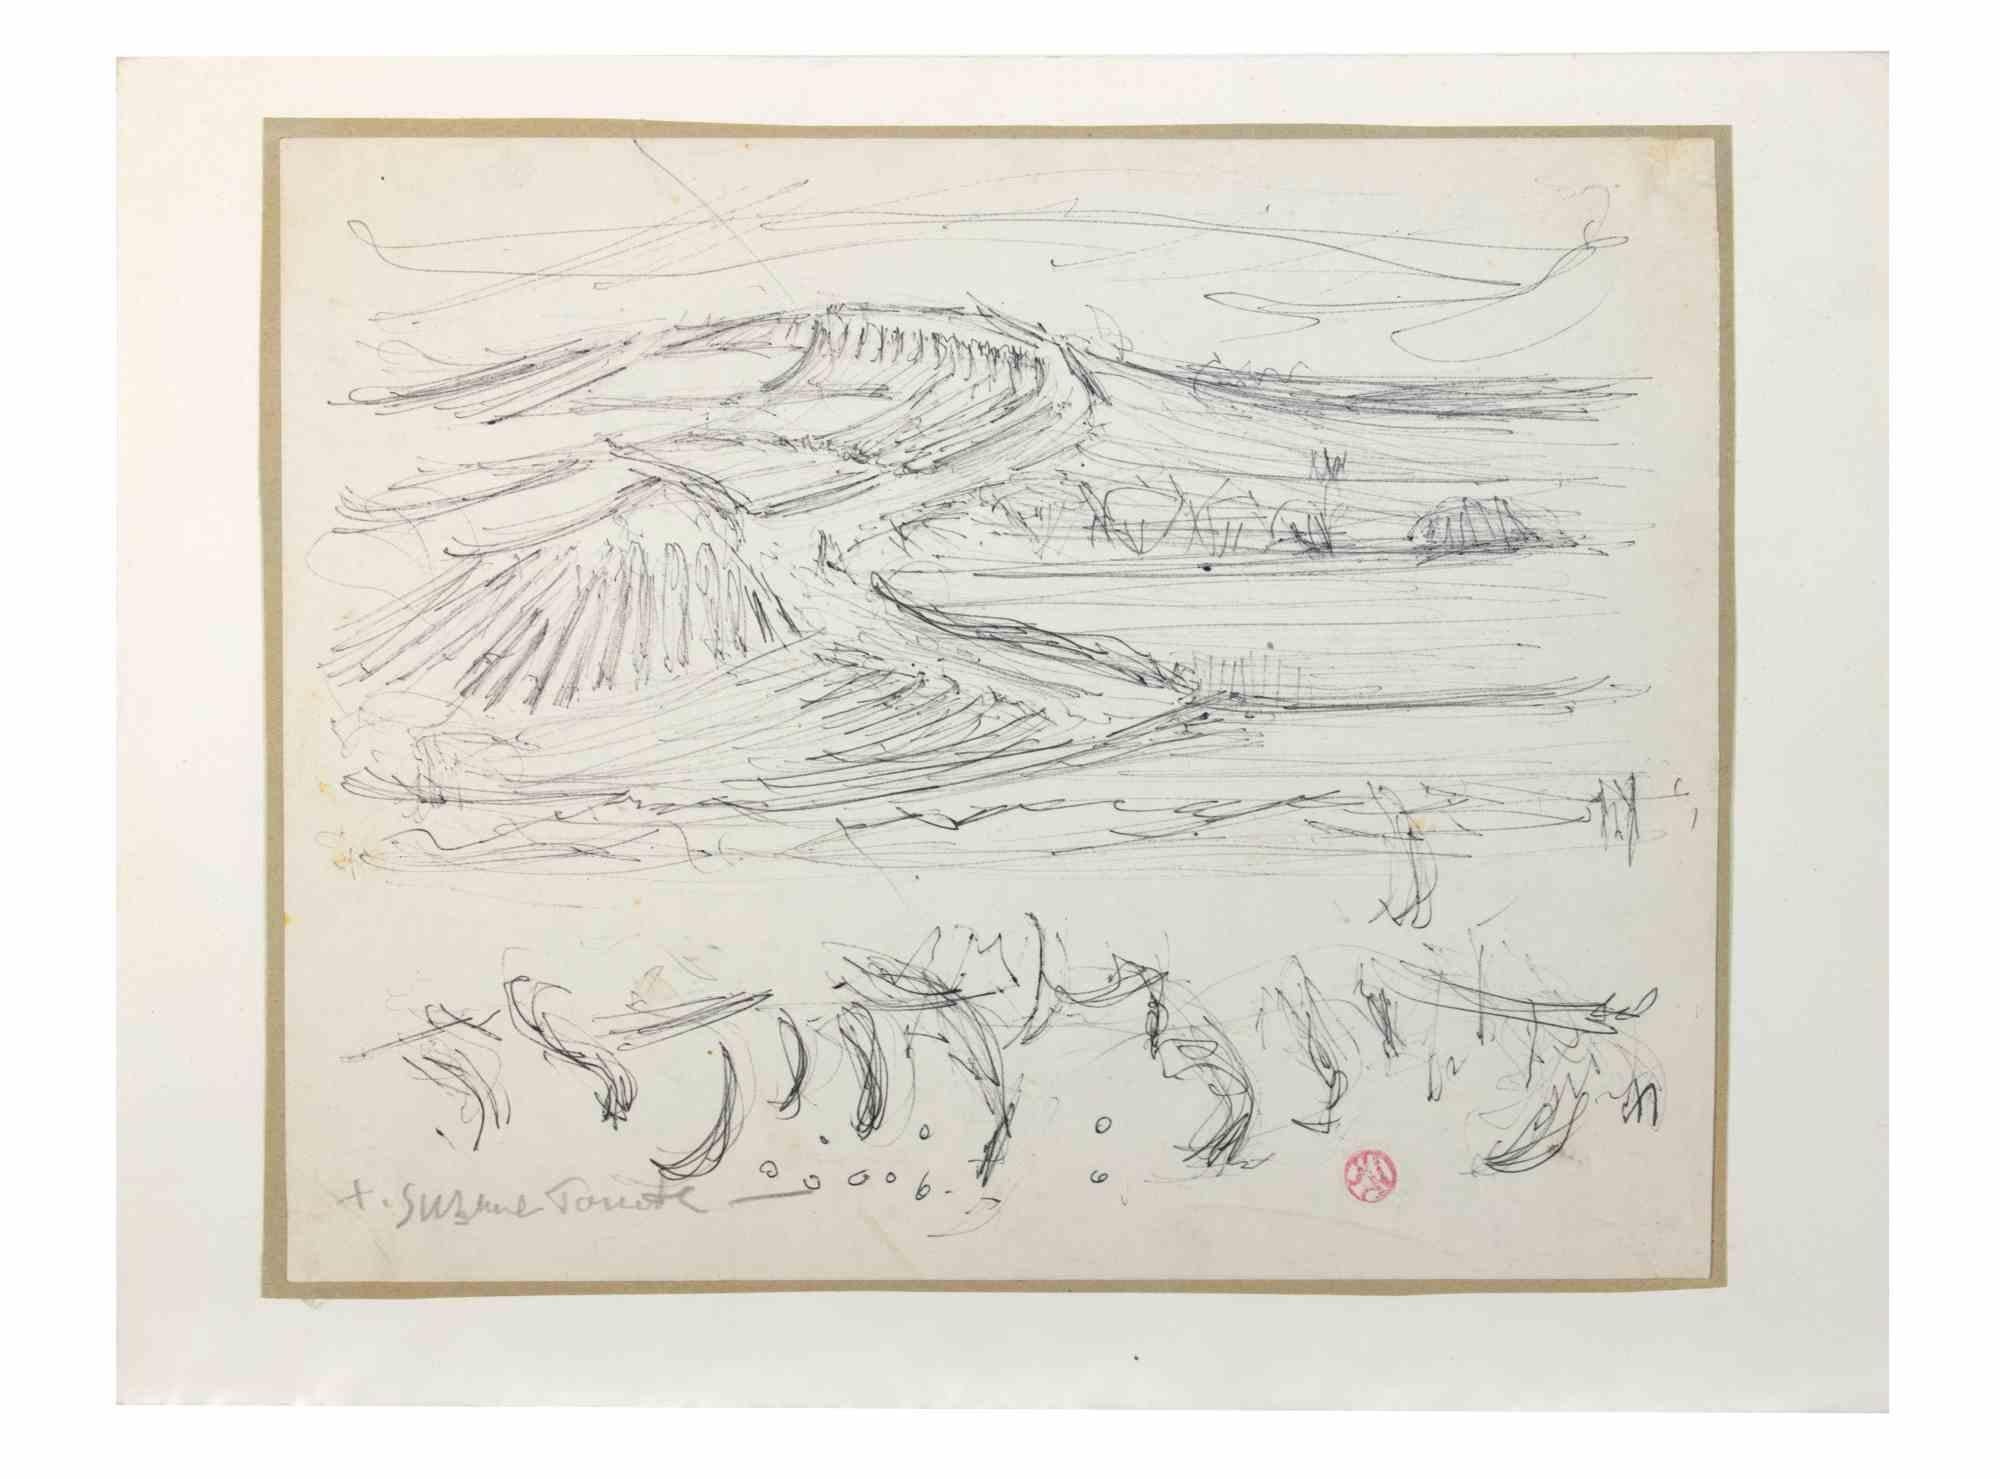 Landscape - Drawing by Suzanne Tourte - 1940s